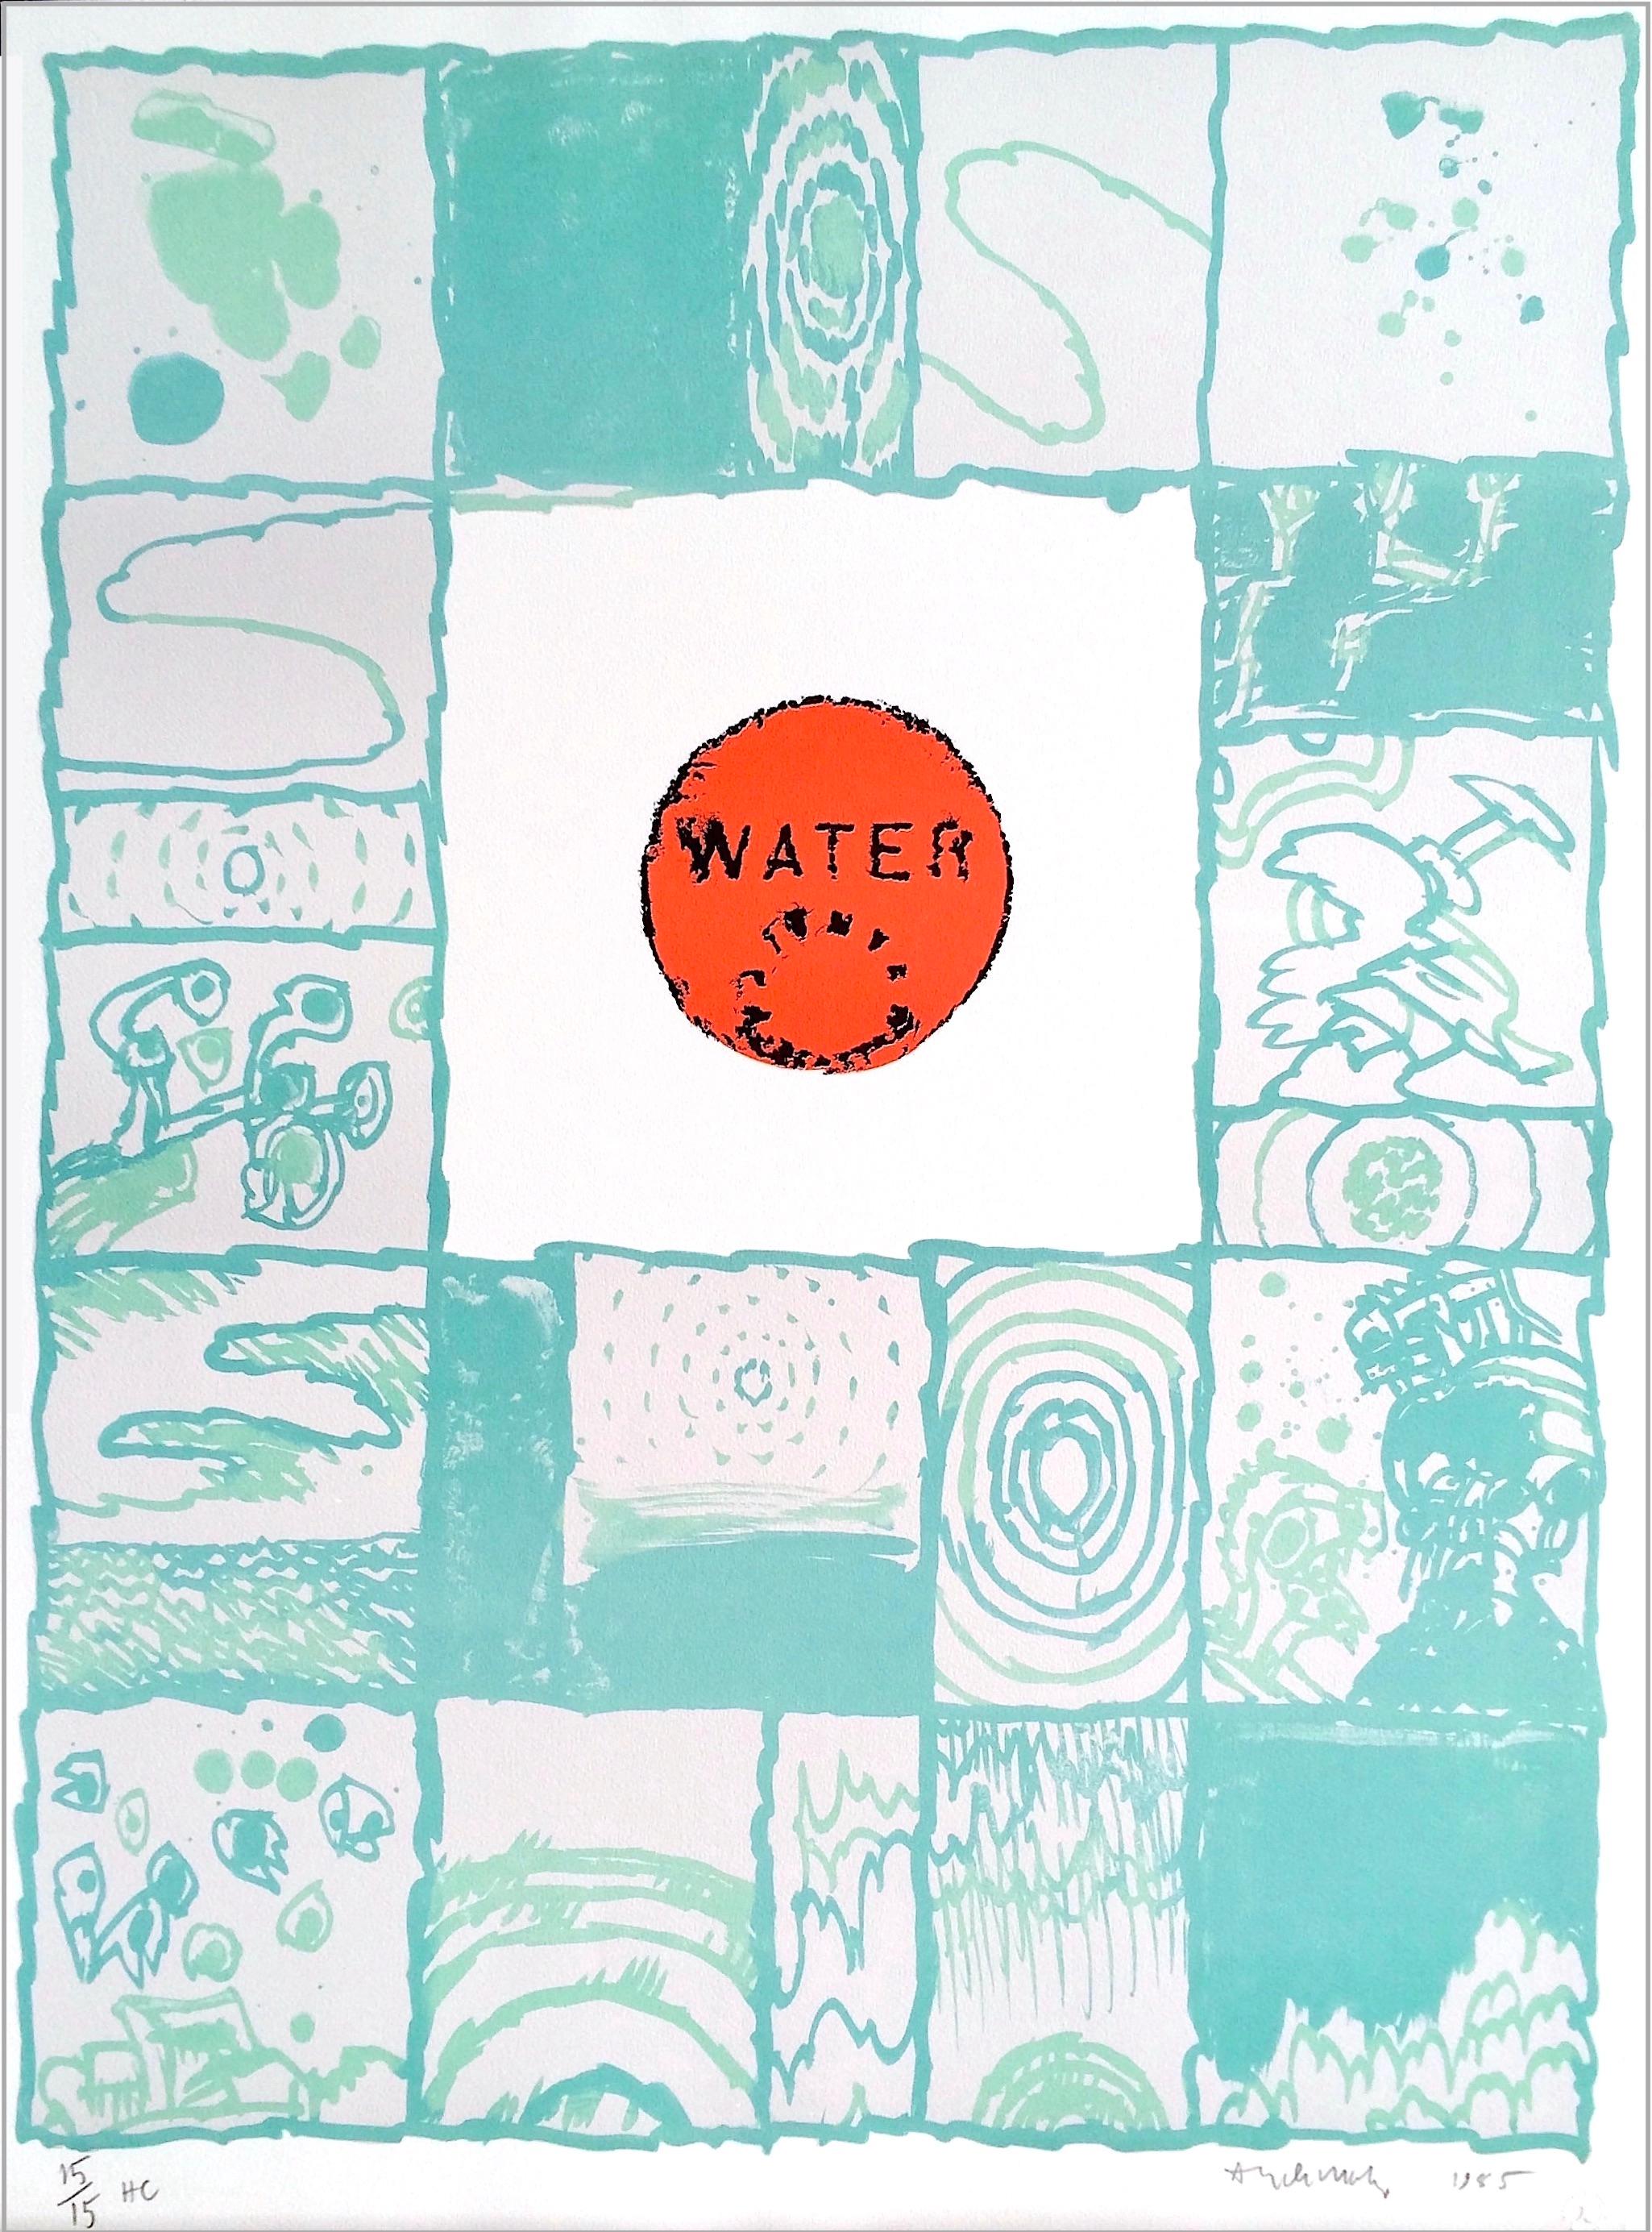 WATER Signed Lithograph, Abstract Chinese Brush Strokes, Manhole Cover, Aqua